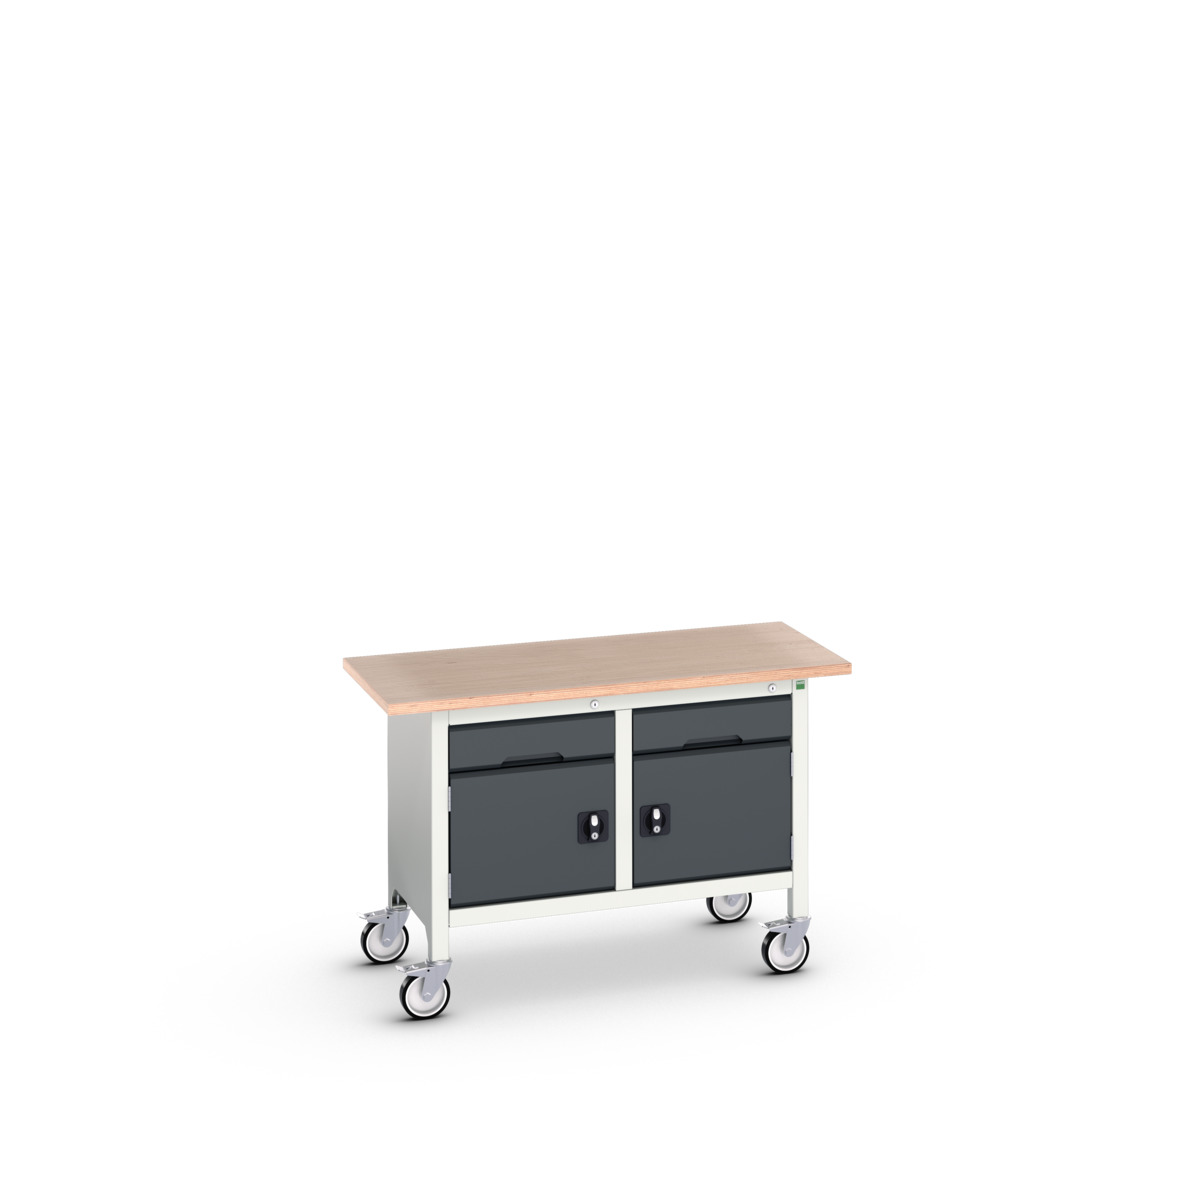 16923201. - verso mobile storage bench (mpx)